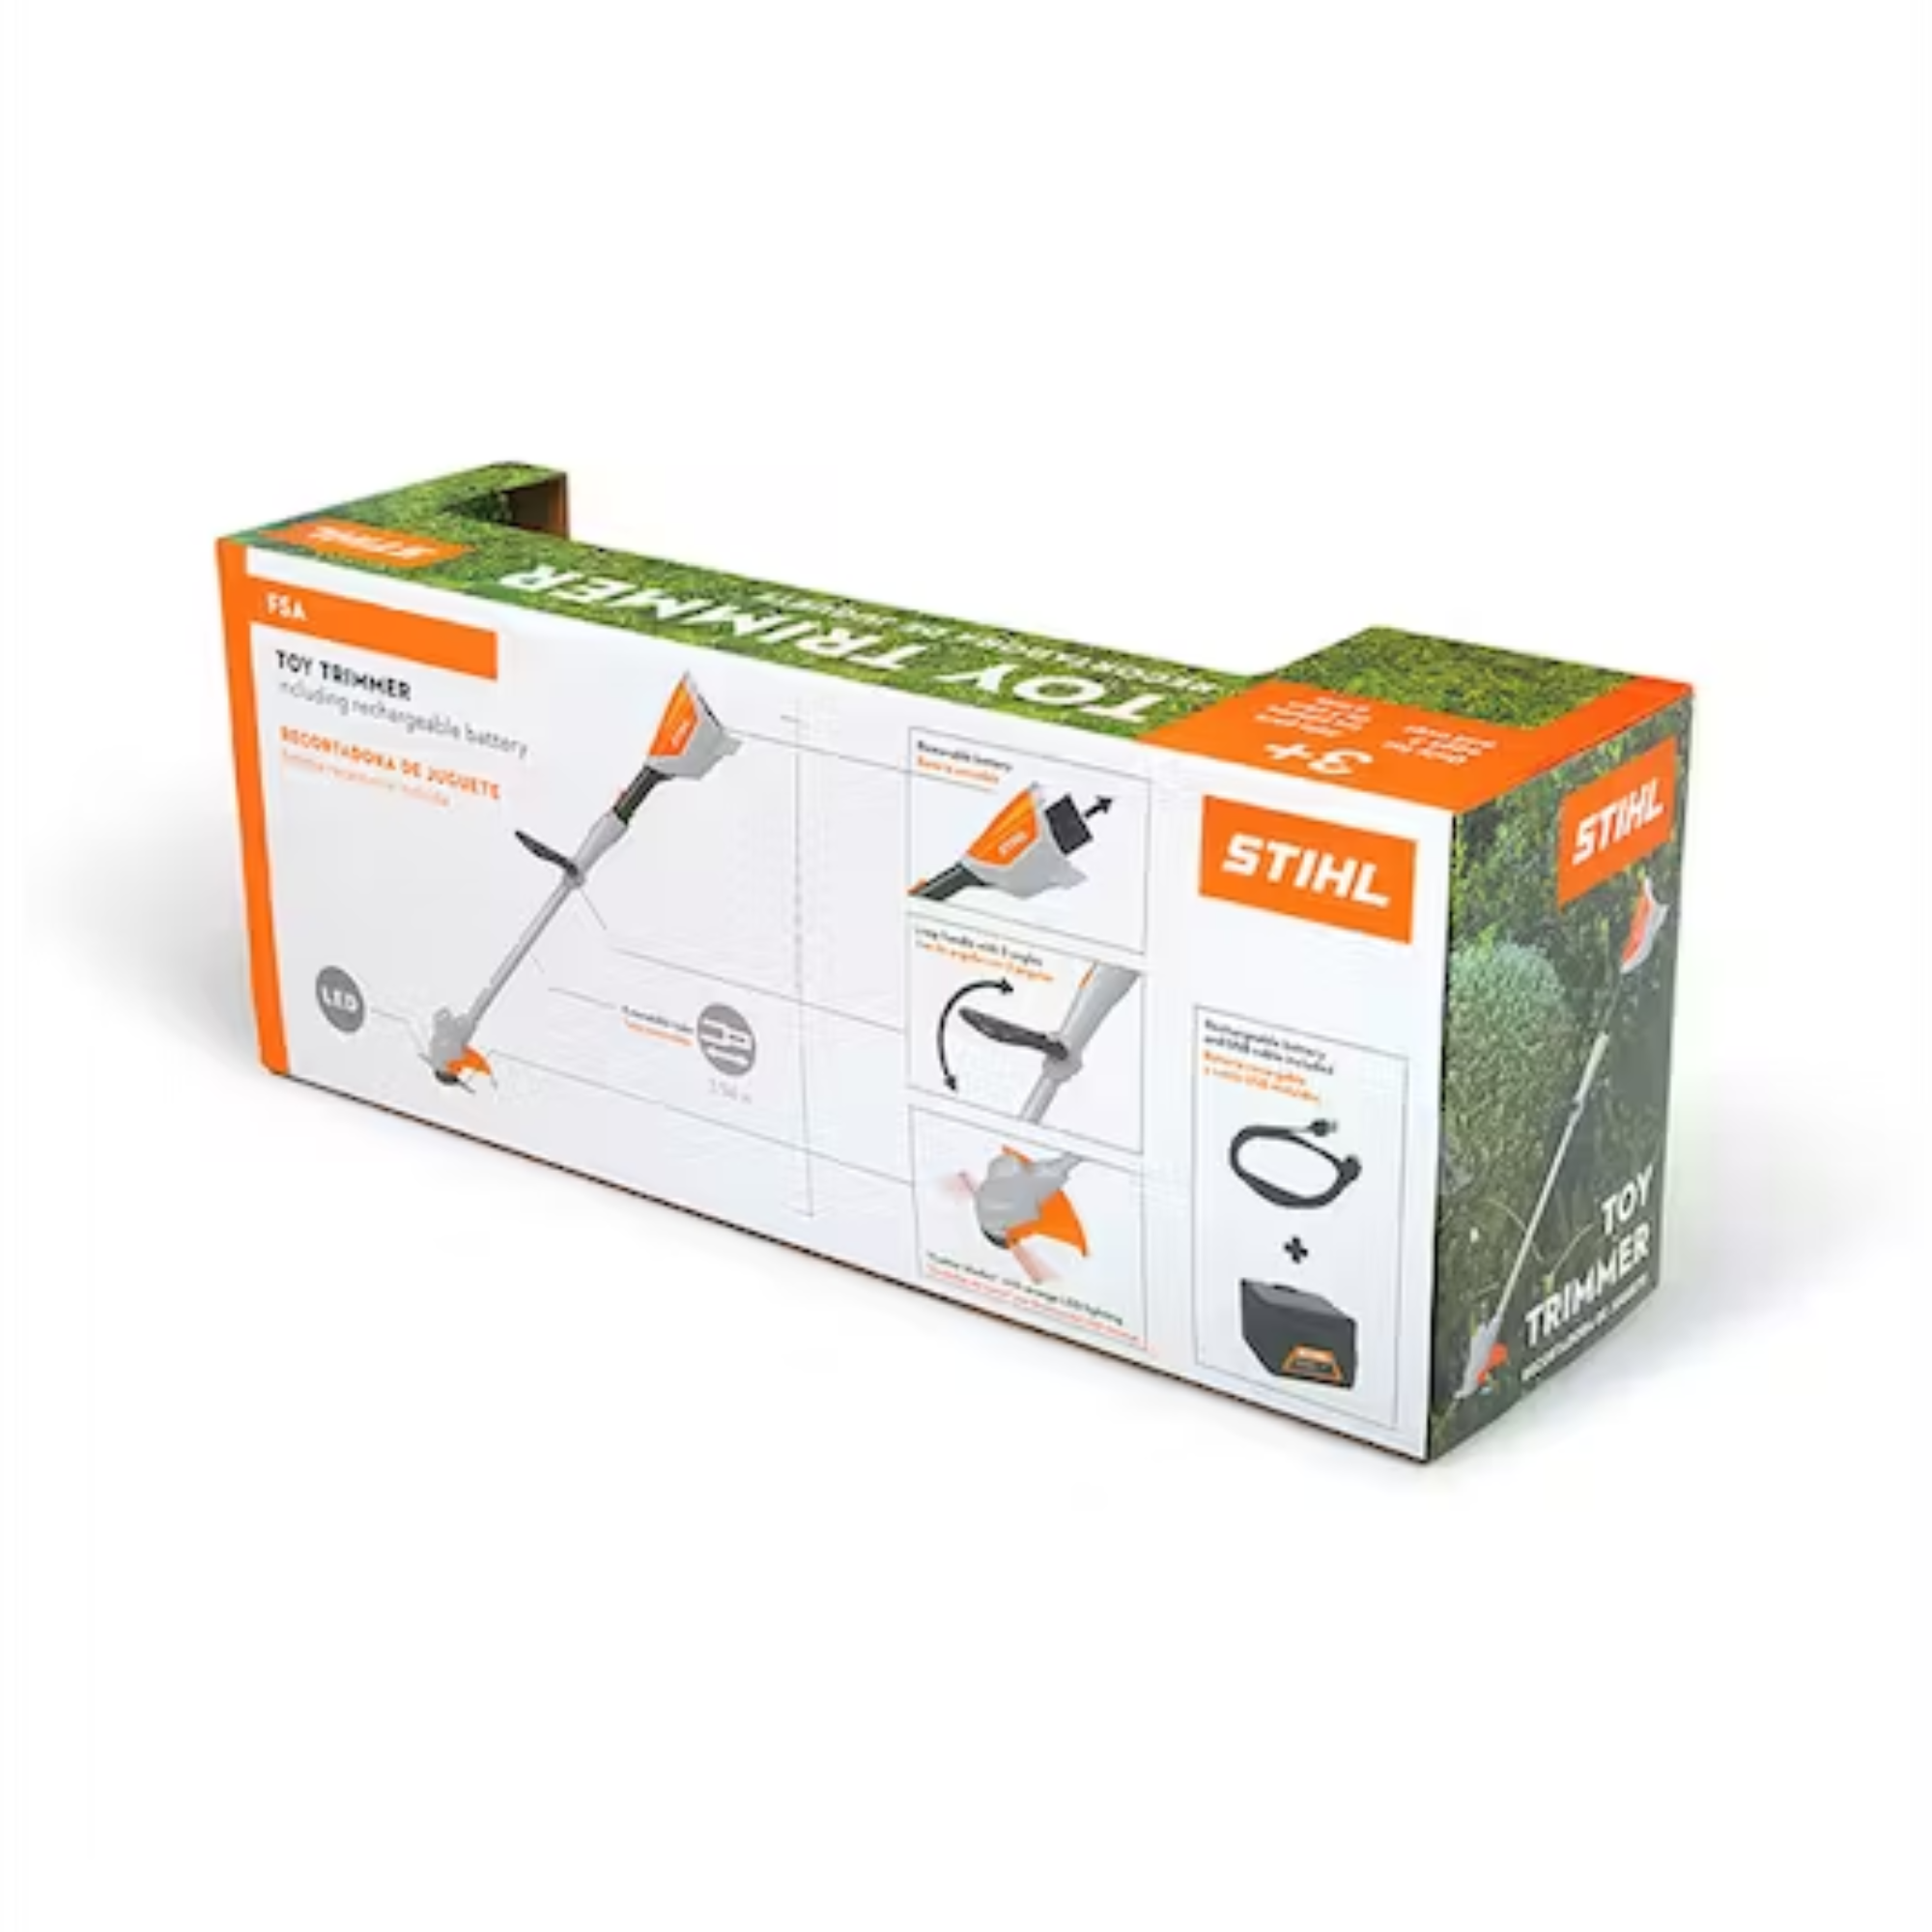 Stihl Childrens Battery Powered Toy Trimmer